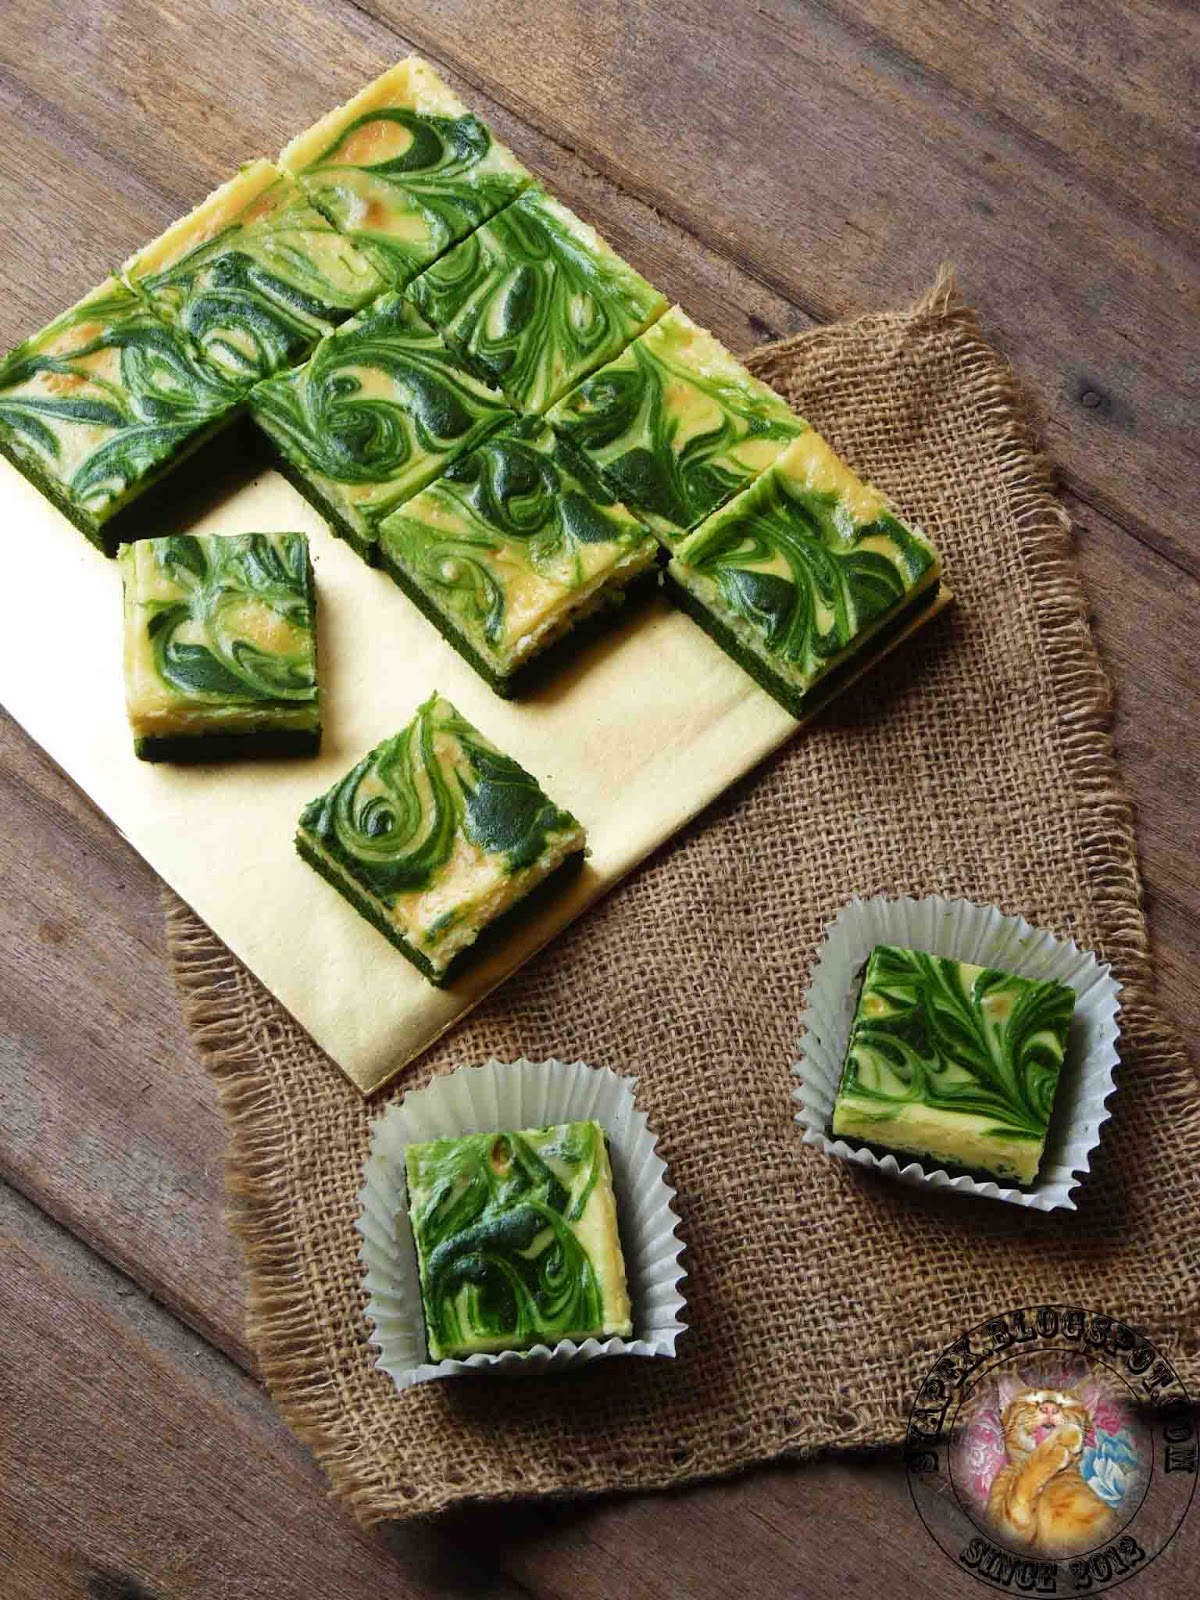 Syapex kitchen: Green Velvet Marble Cheese Brownies